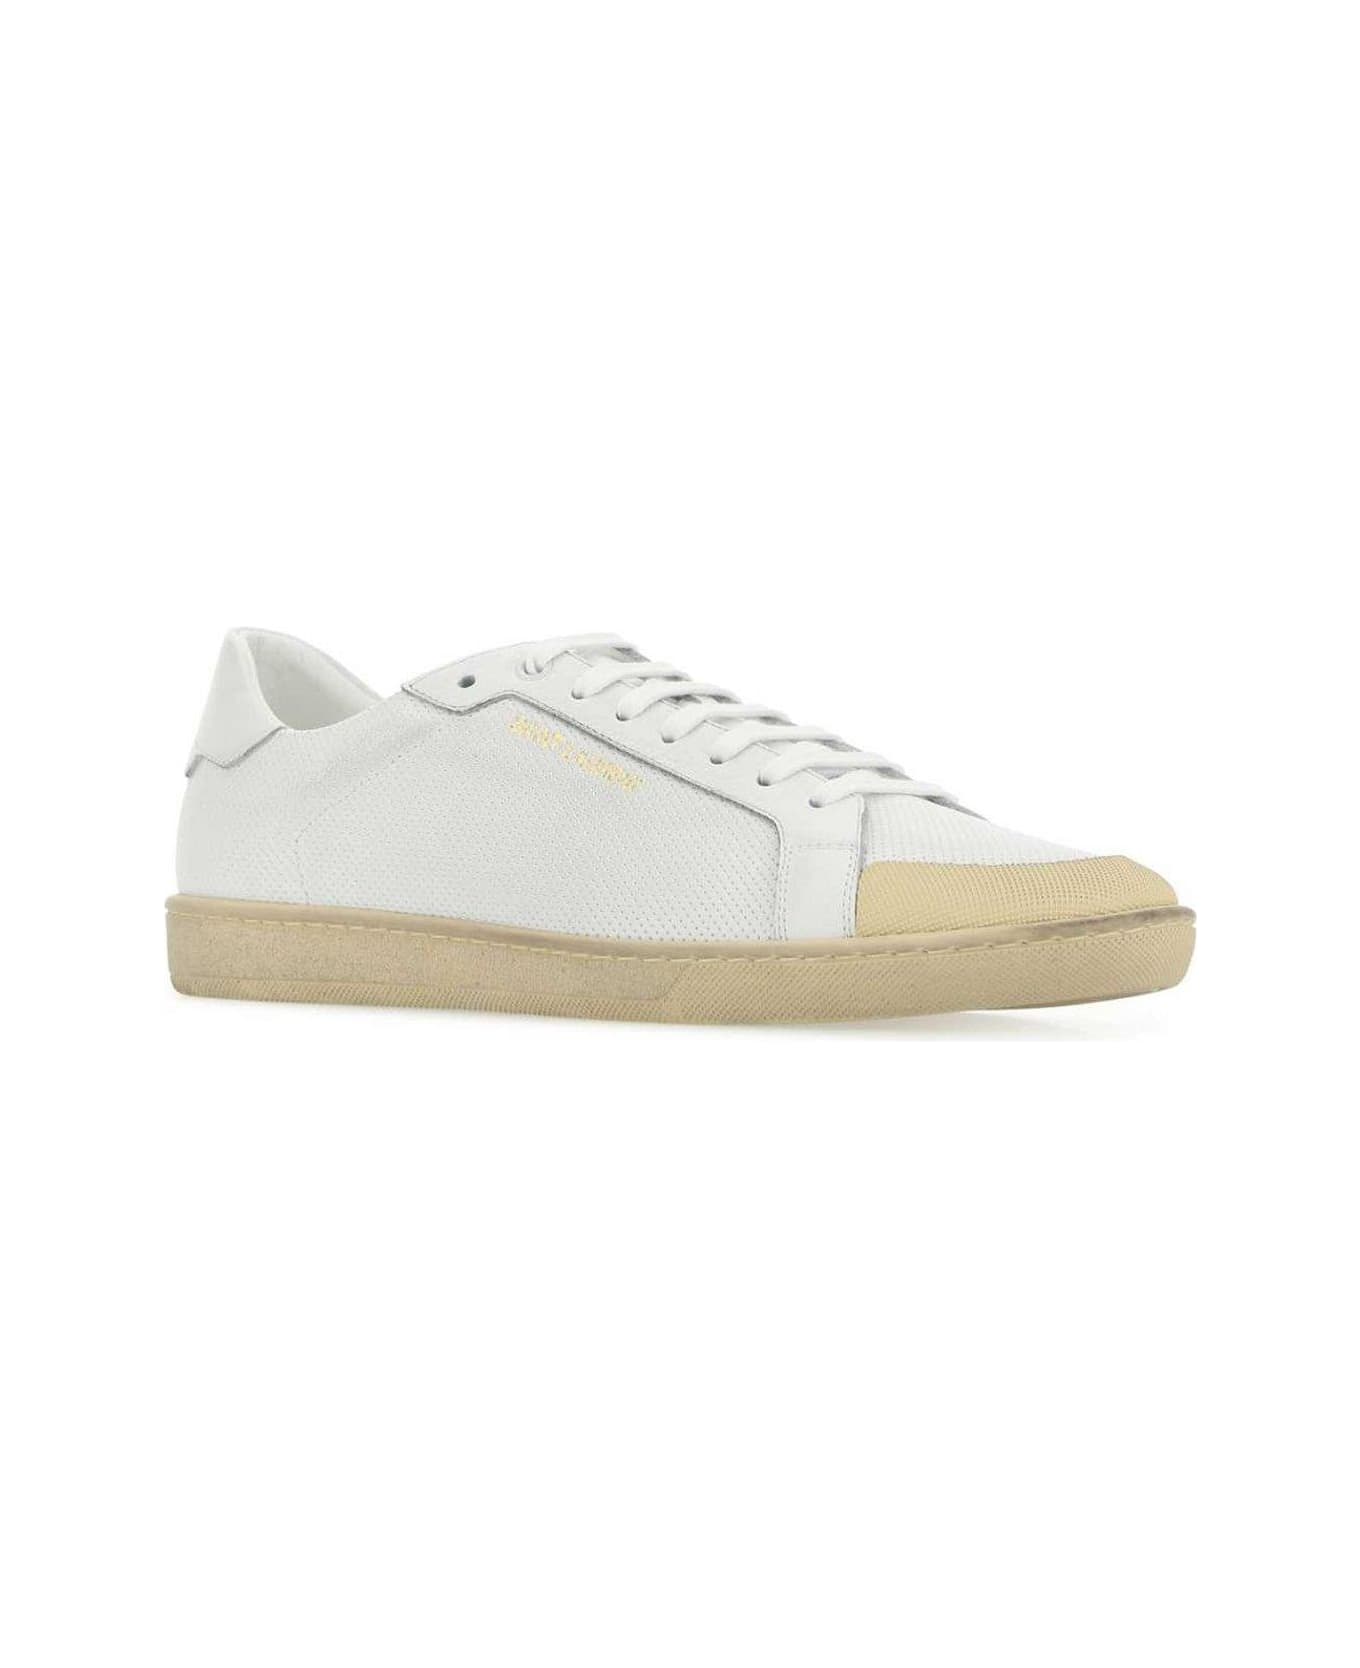 Saint Laurent Round Toe Lace-up Sneakers - Bianco